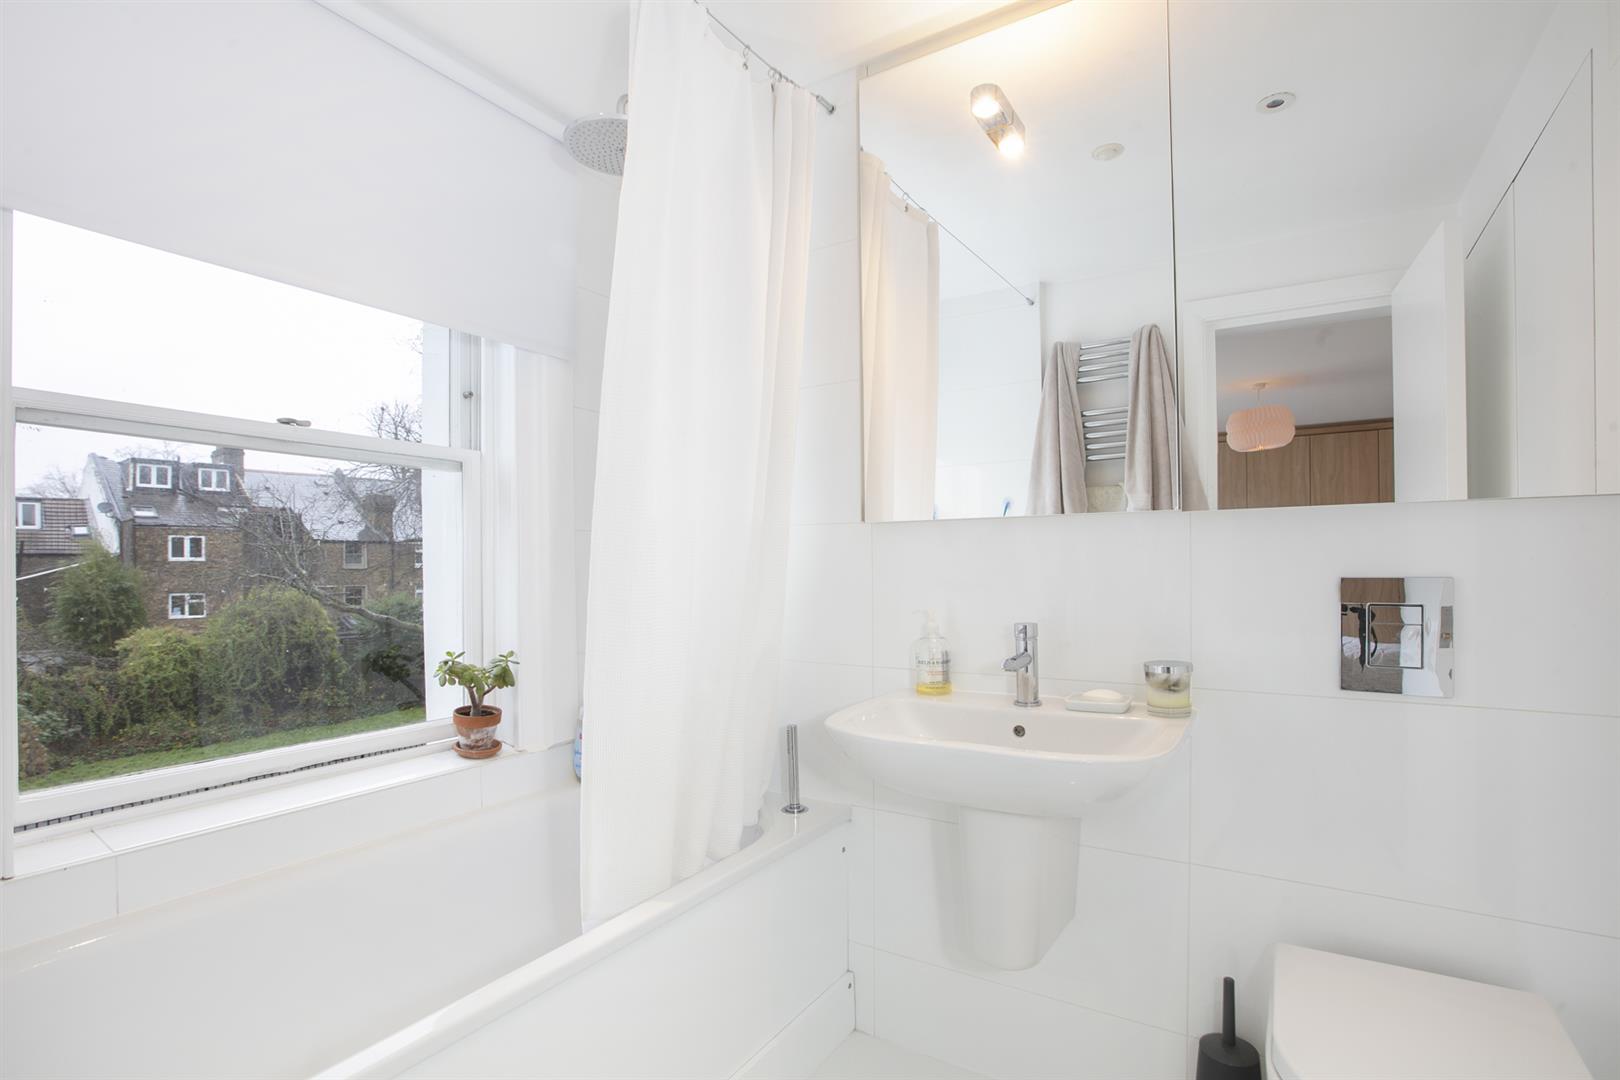 Flat - Conversion For Sale in Holly Grove, Peckham, SE15 893 view16